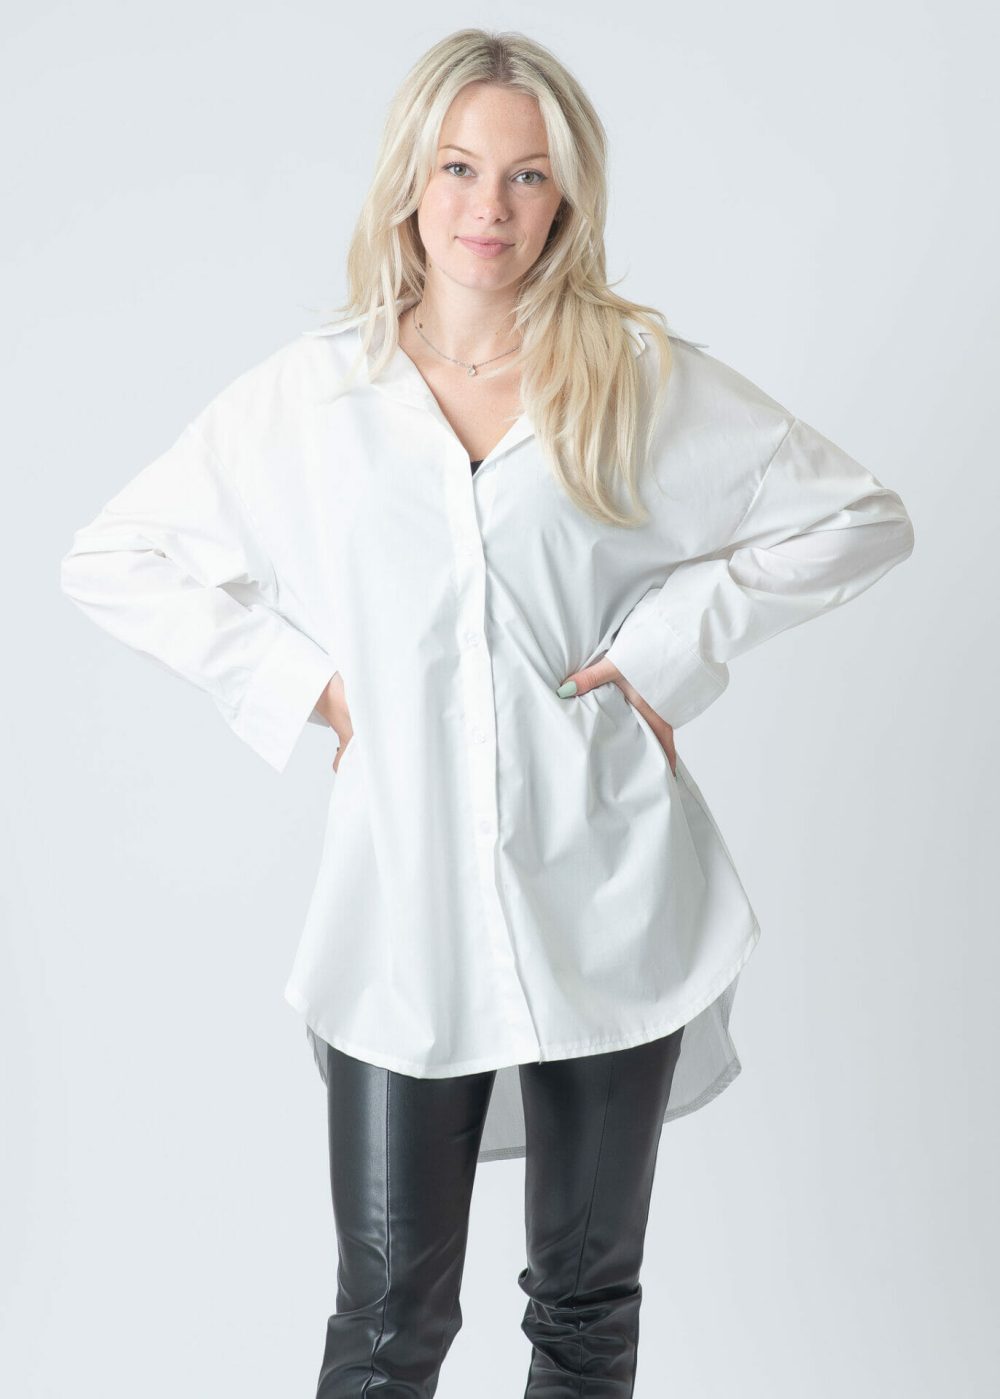 Witte blouse - One size